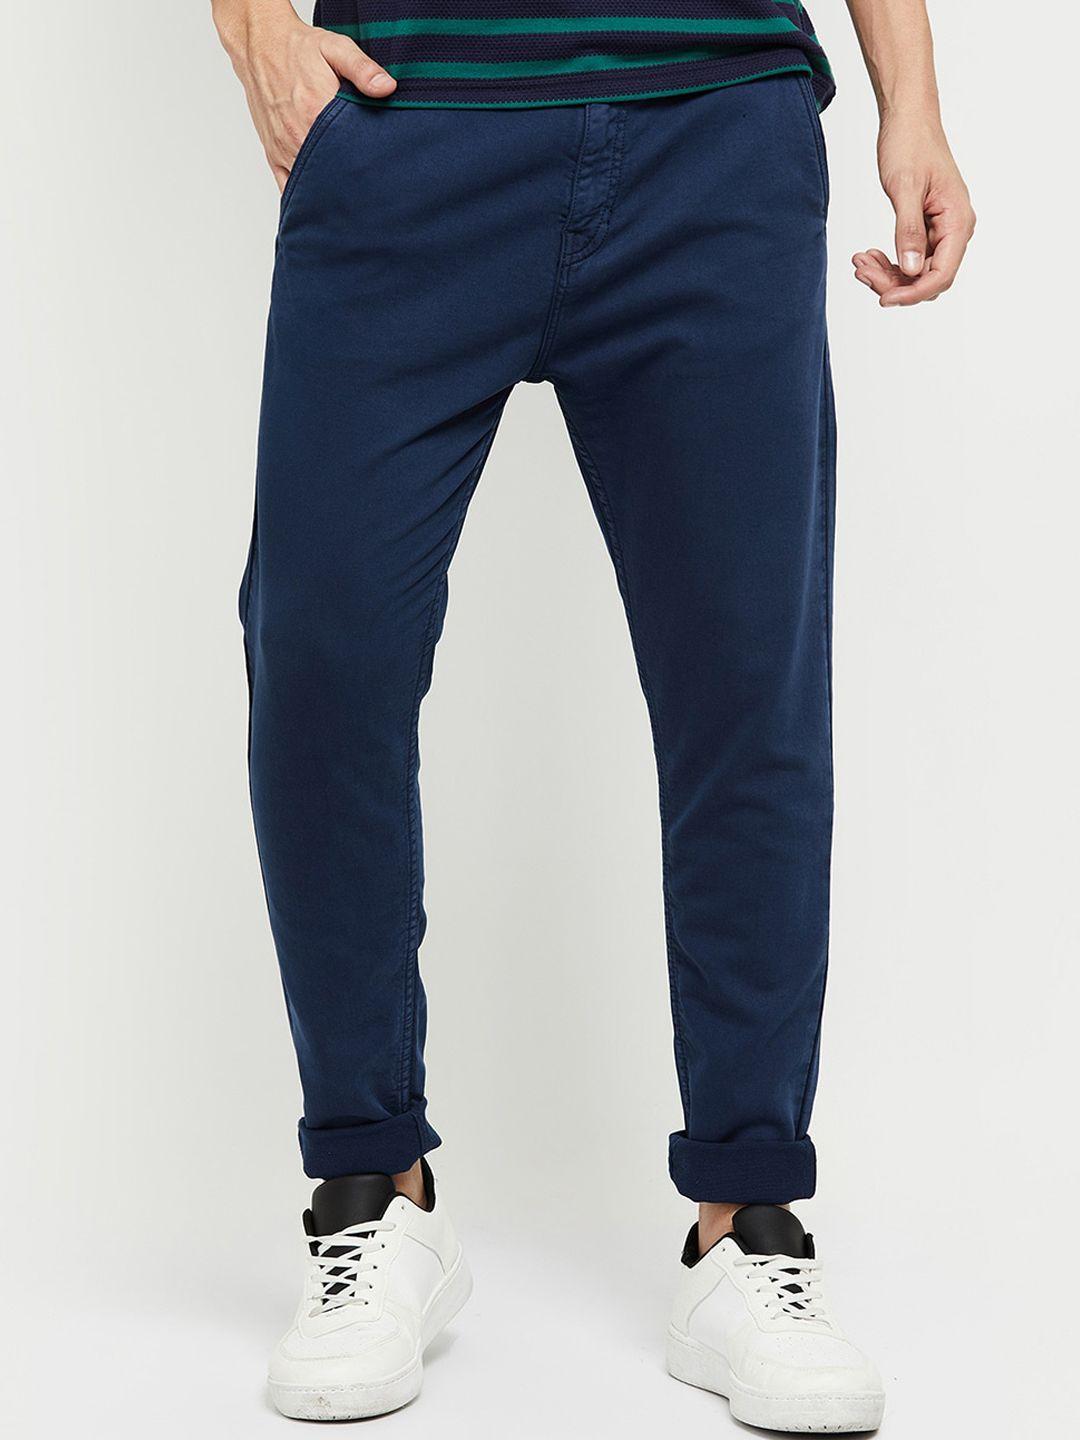 max-men-blue-chinos-trousers